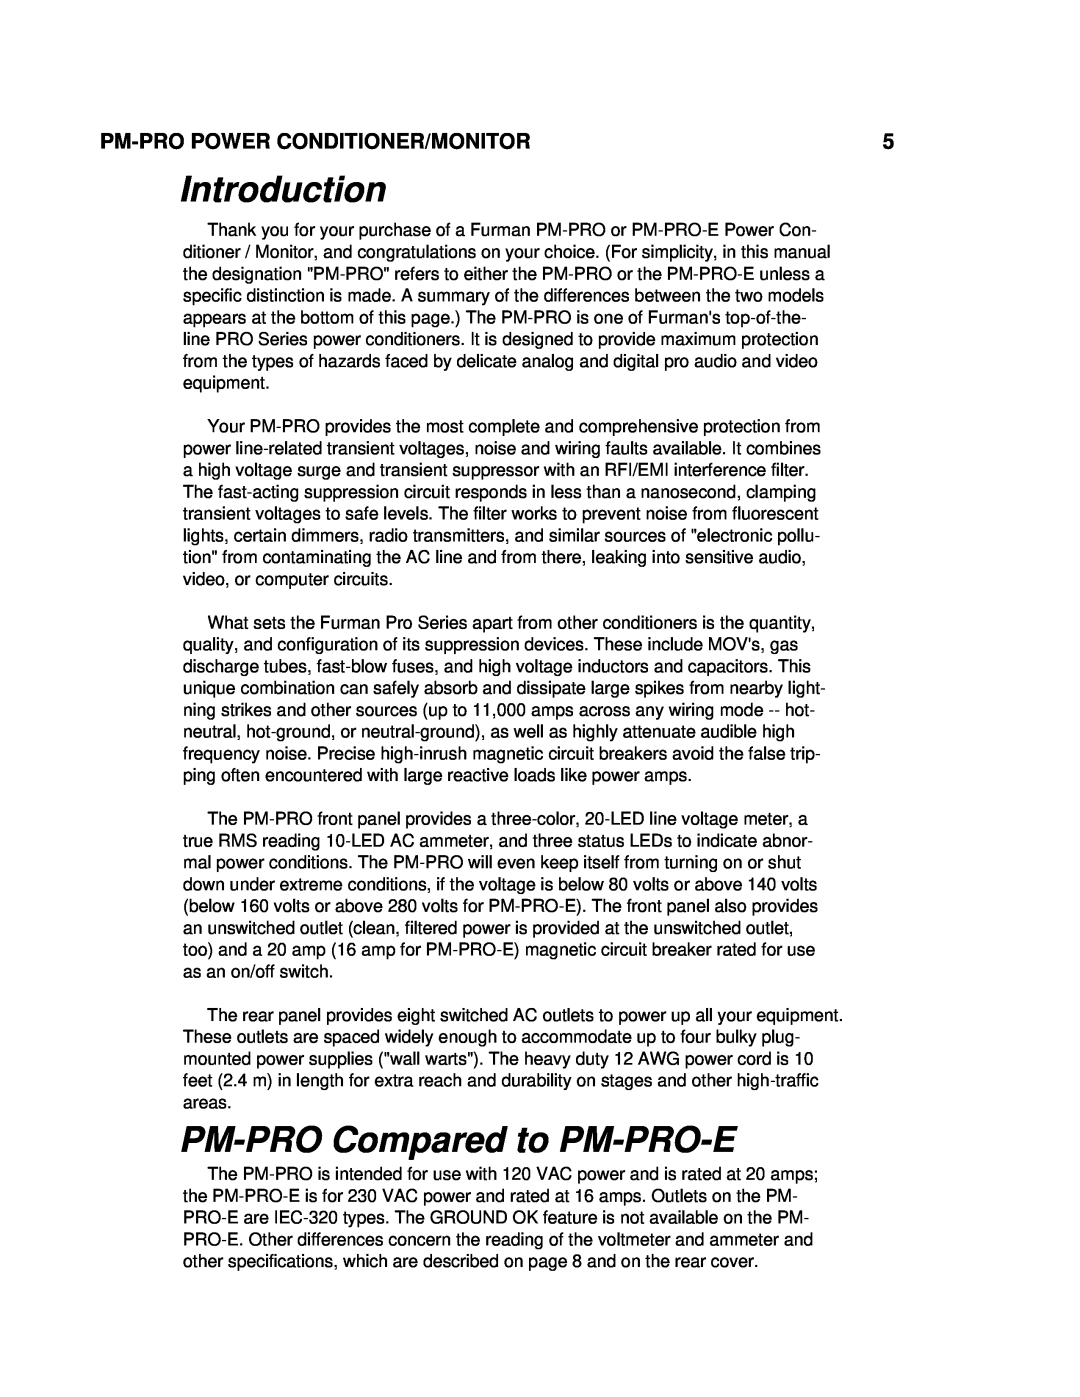 Furman Sound owner manual Introduction, PM-PRO Compared to PM-PRO-E, Pm-Pro Power Conditioner/Monitor 